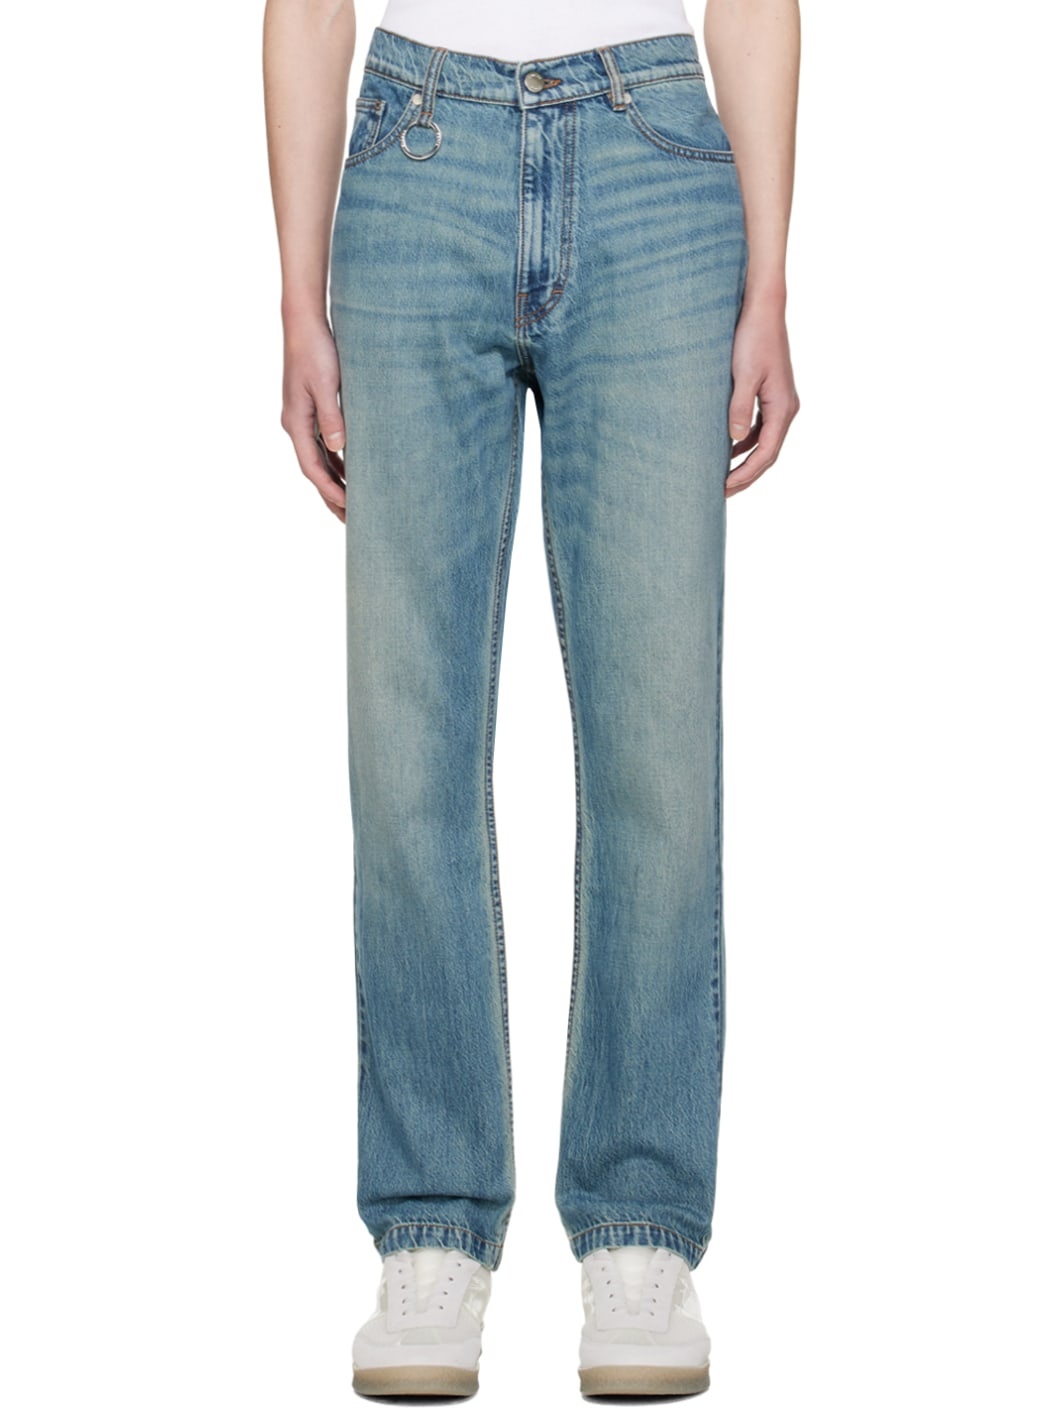 Blue Relic Jeans - 1